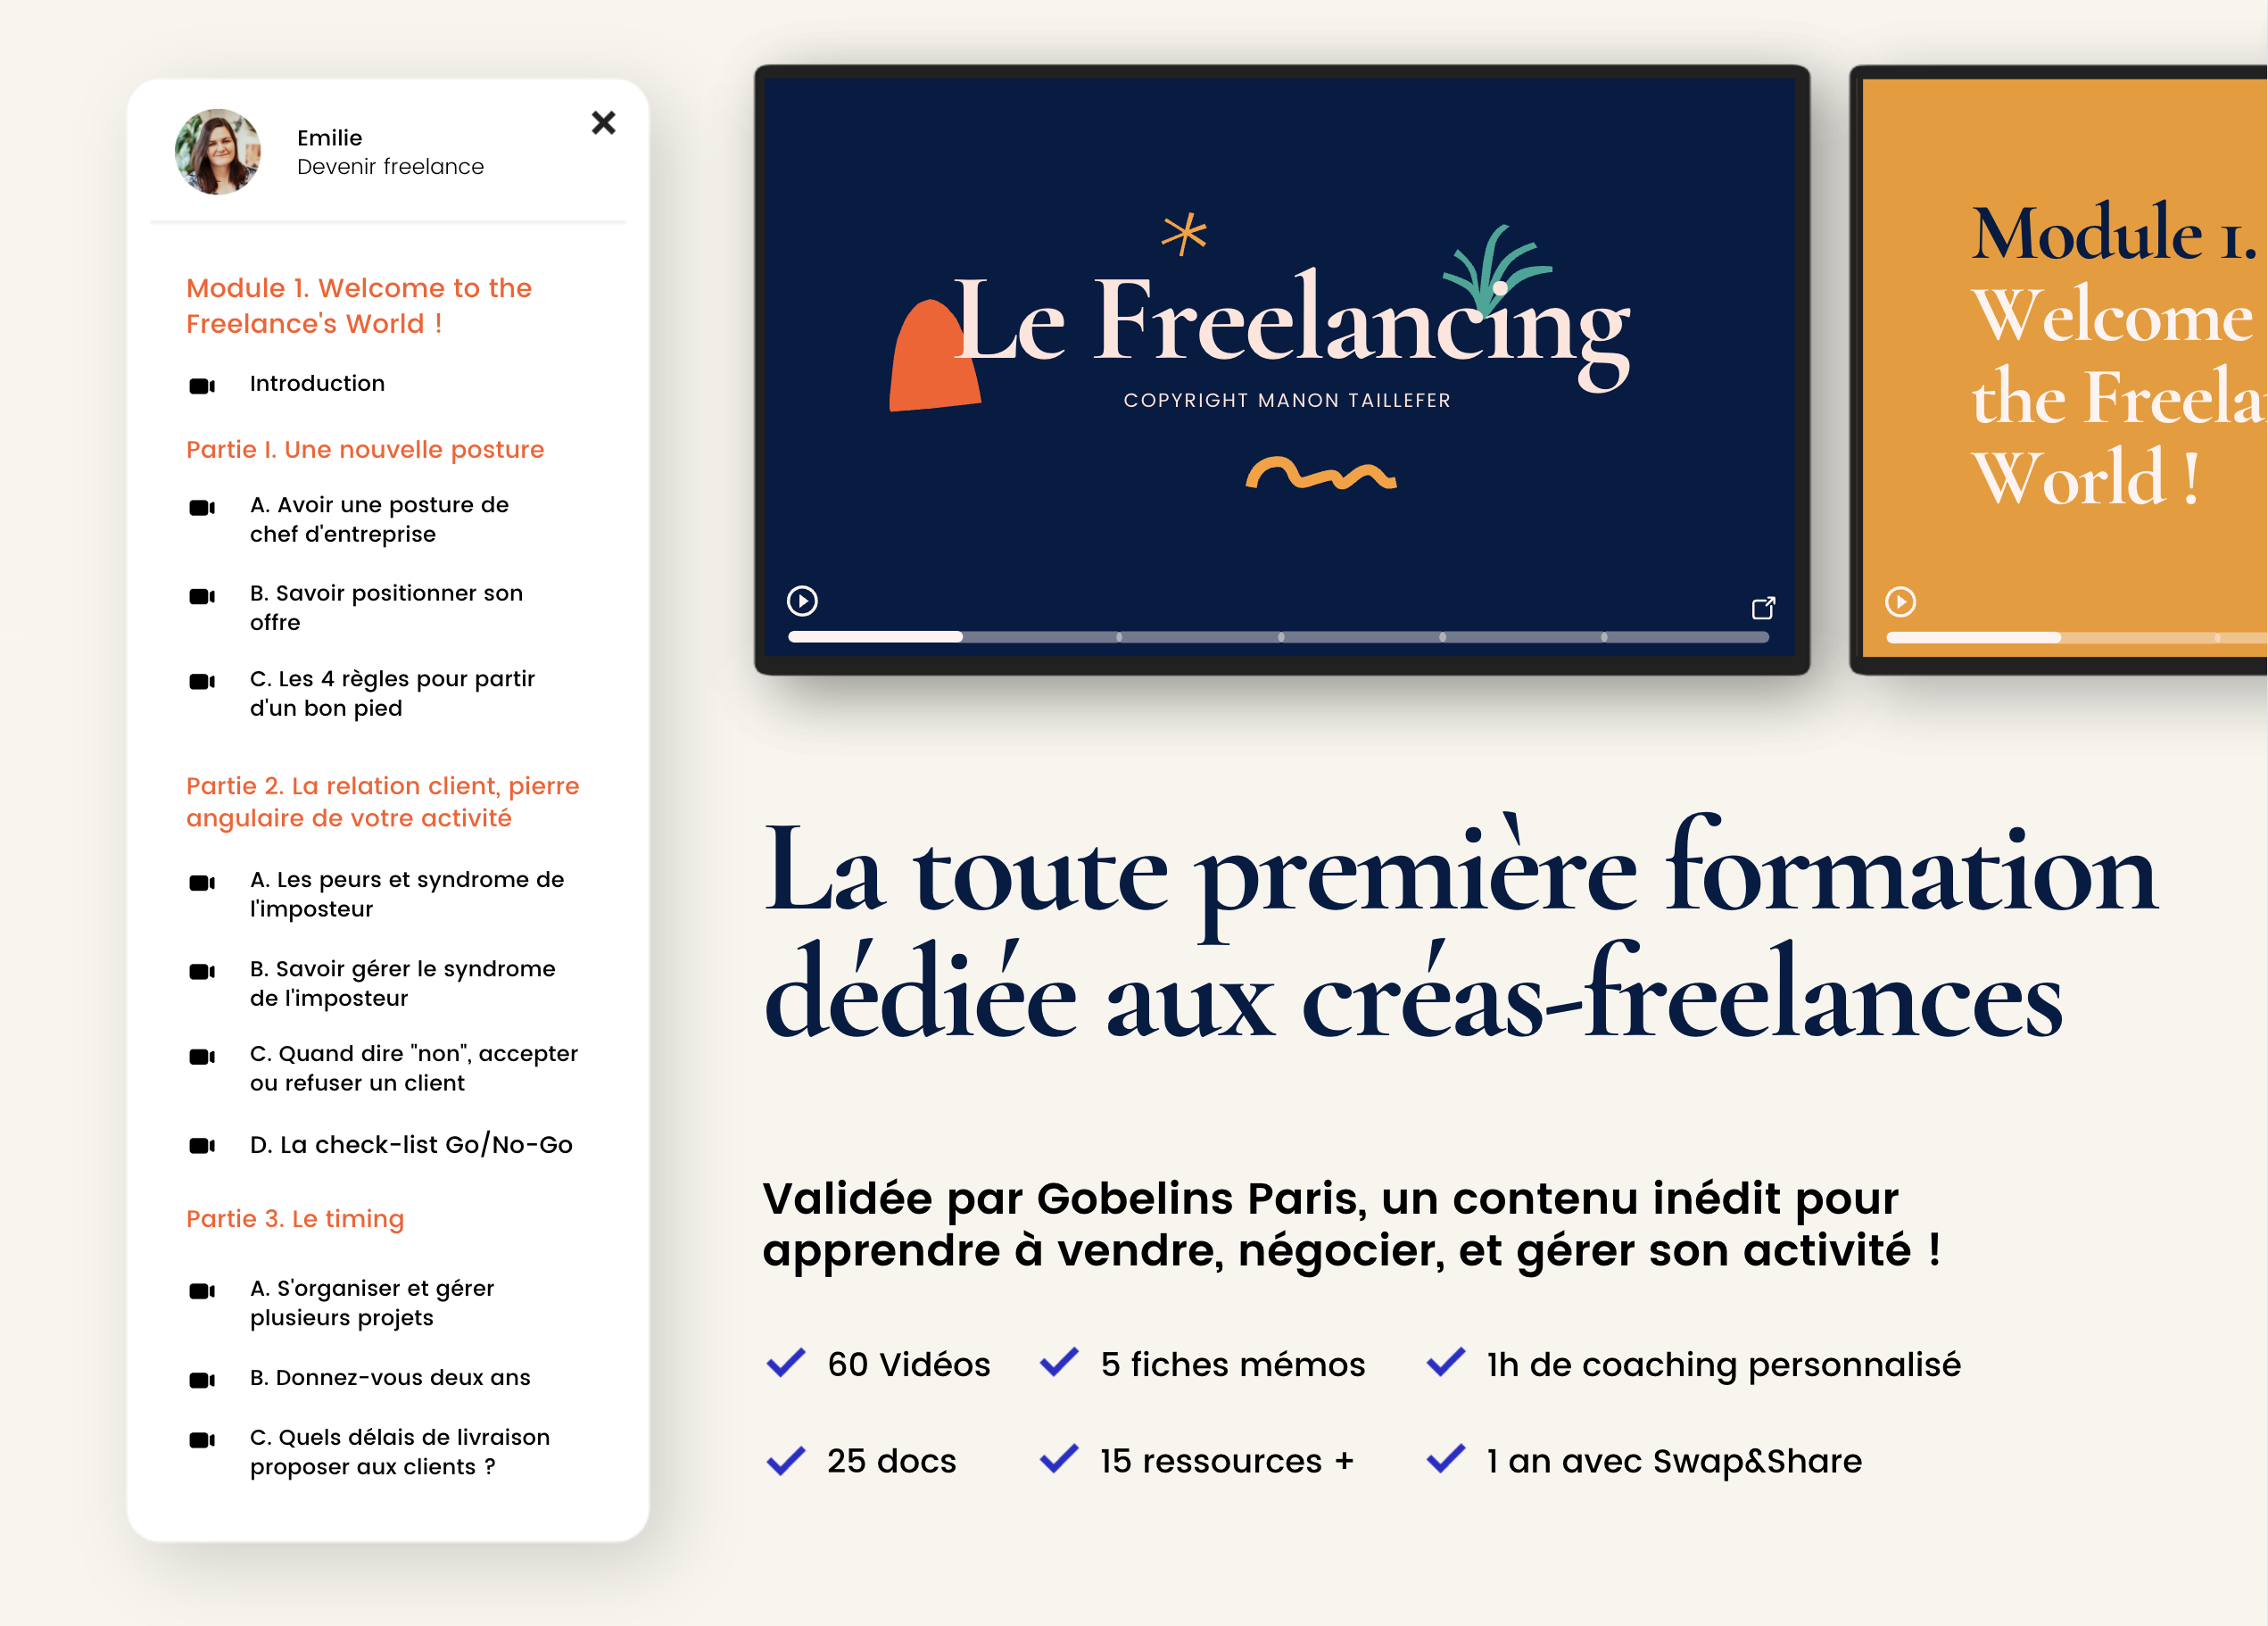 Formation " Le Freelancing" Manon Taillefer 